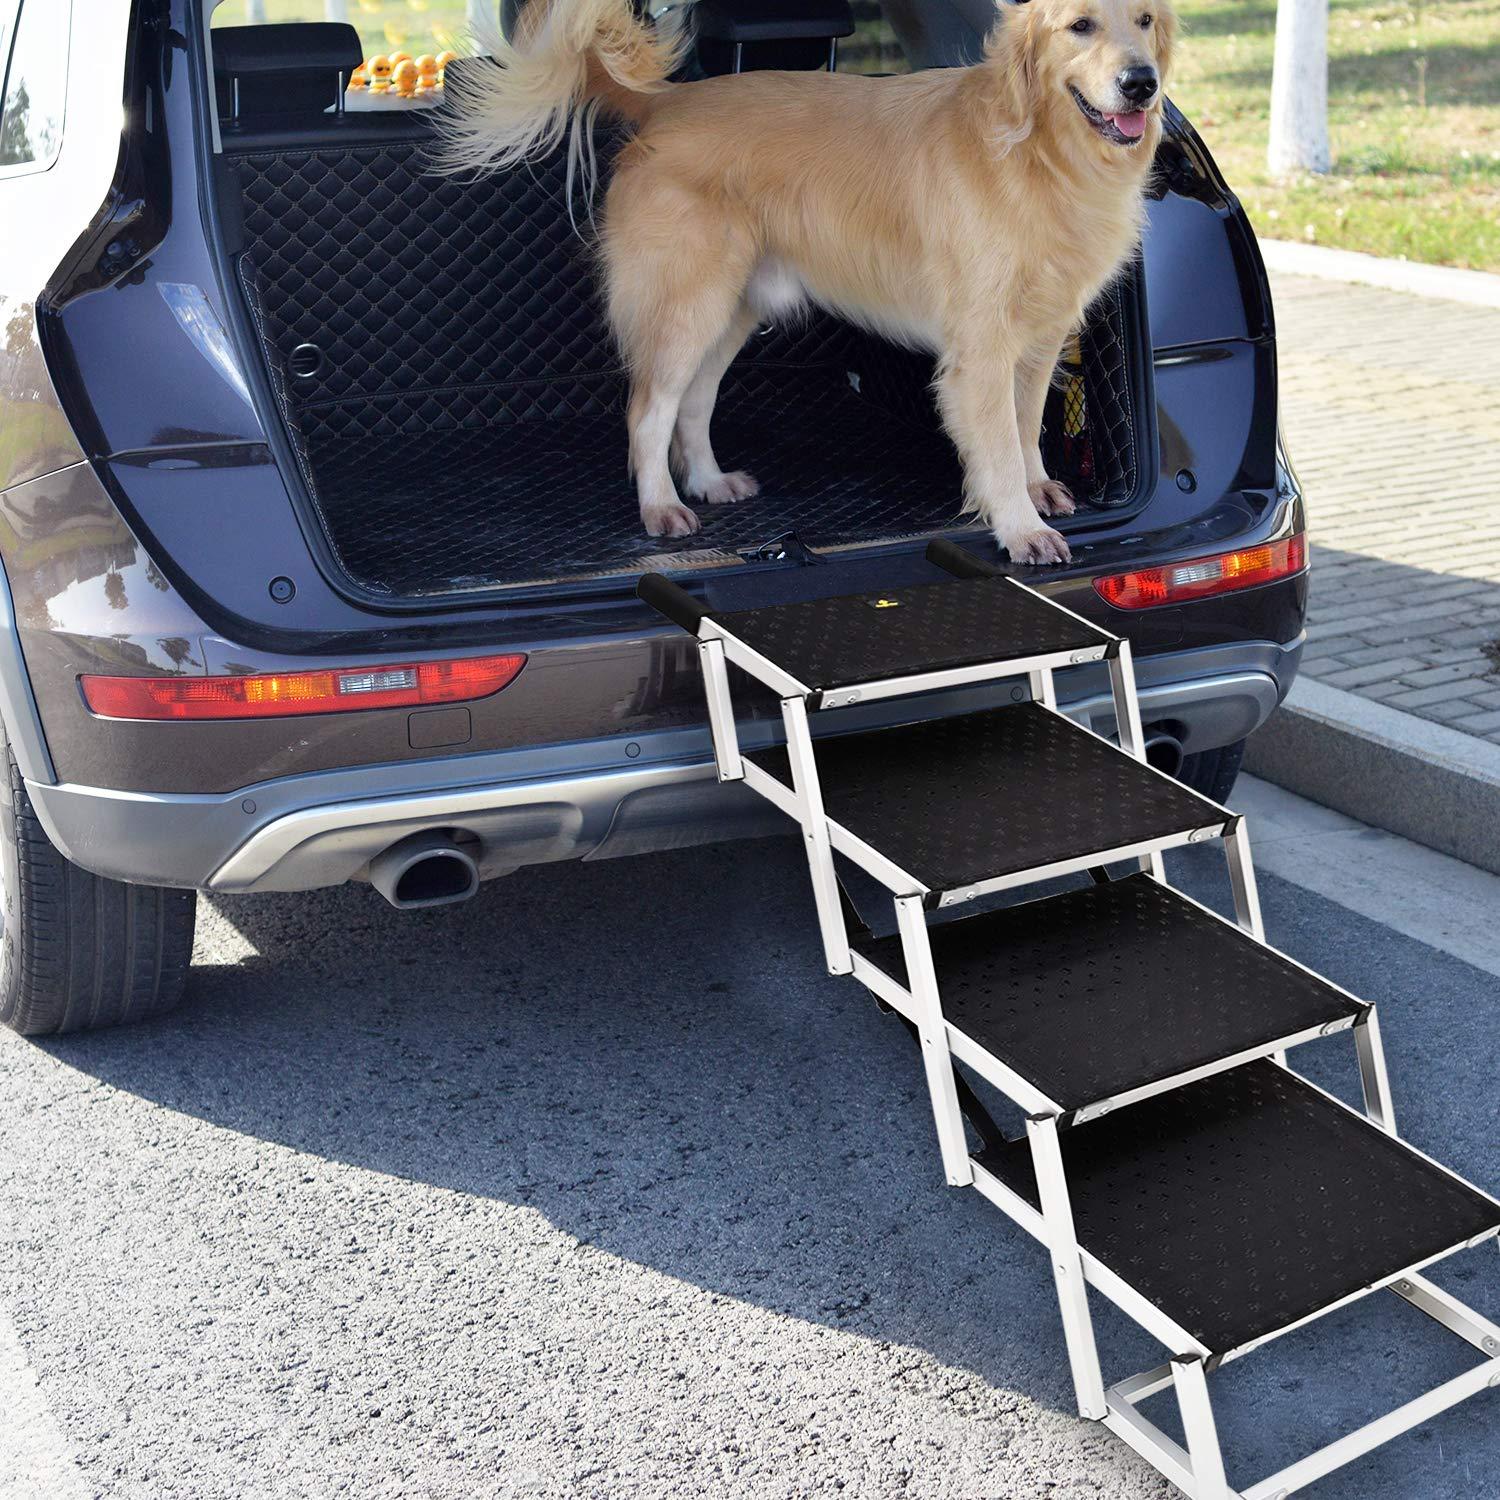 Portable Dog Car Step Stairs, Folding Dog Ramp for Large Dogs,Aluminum Frame Pet Stairs for Indoor Outdoor Use, Accordion Lightweight Auto Large Pet Ladder for Cars,Trucks,SUVs Cargo and High,4 Steps